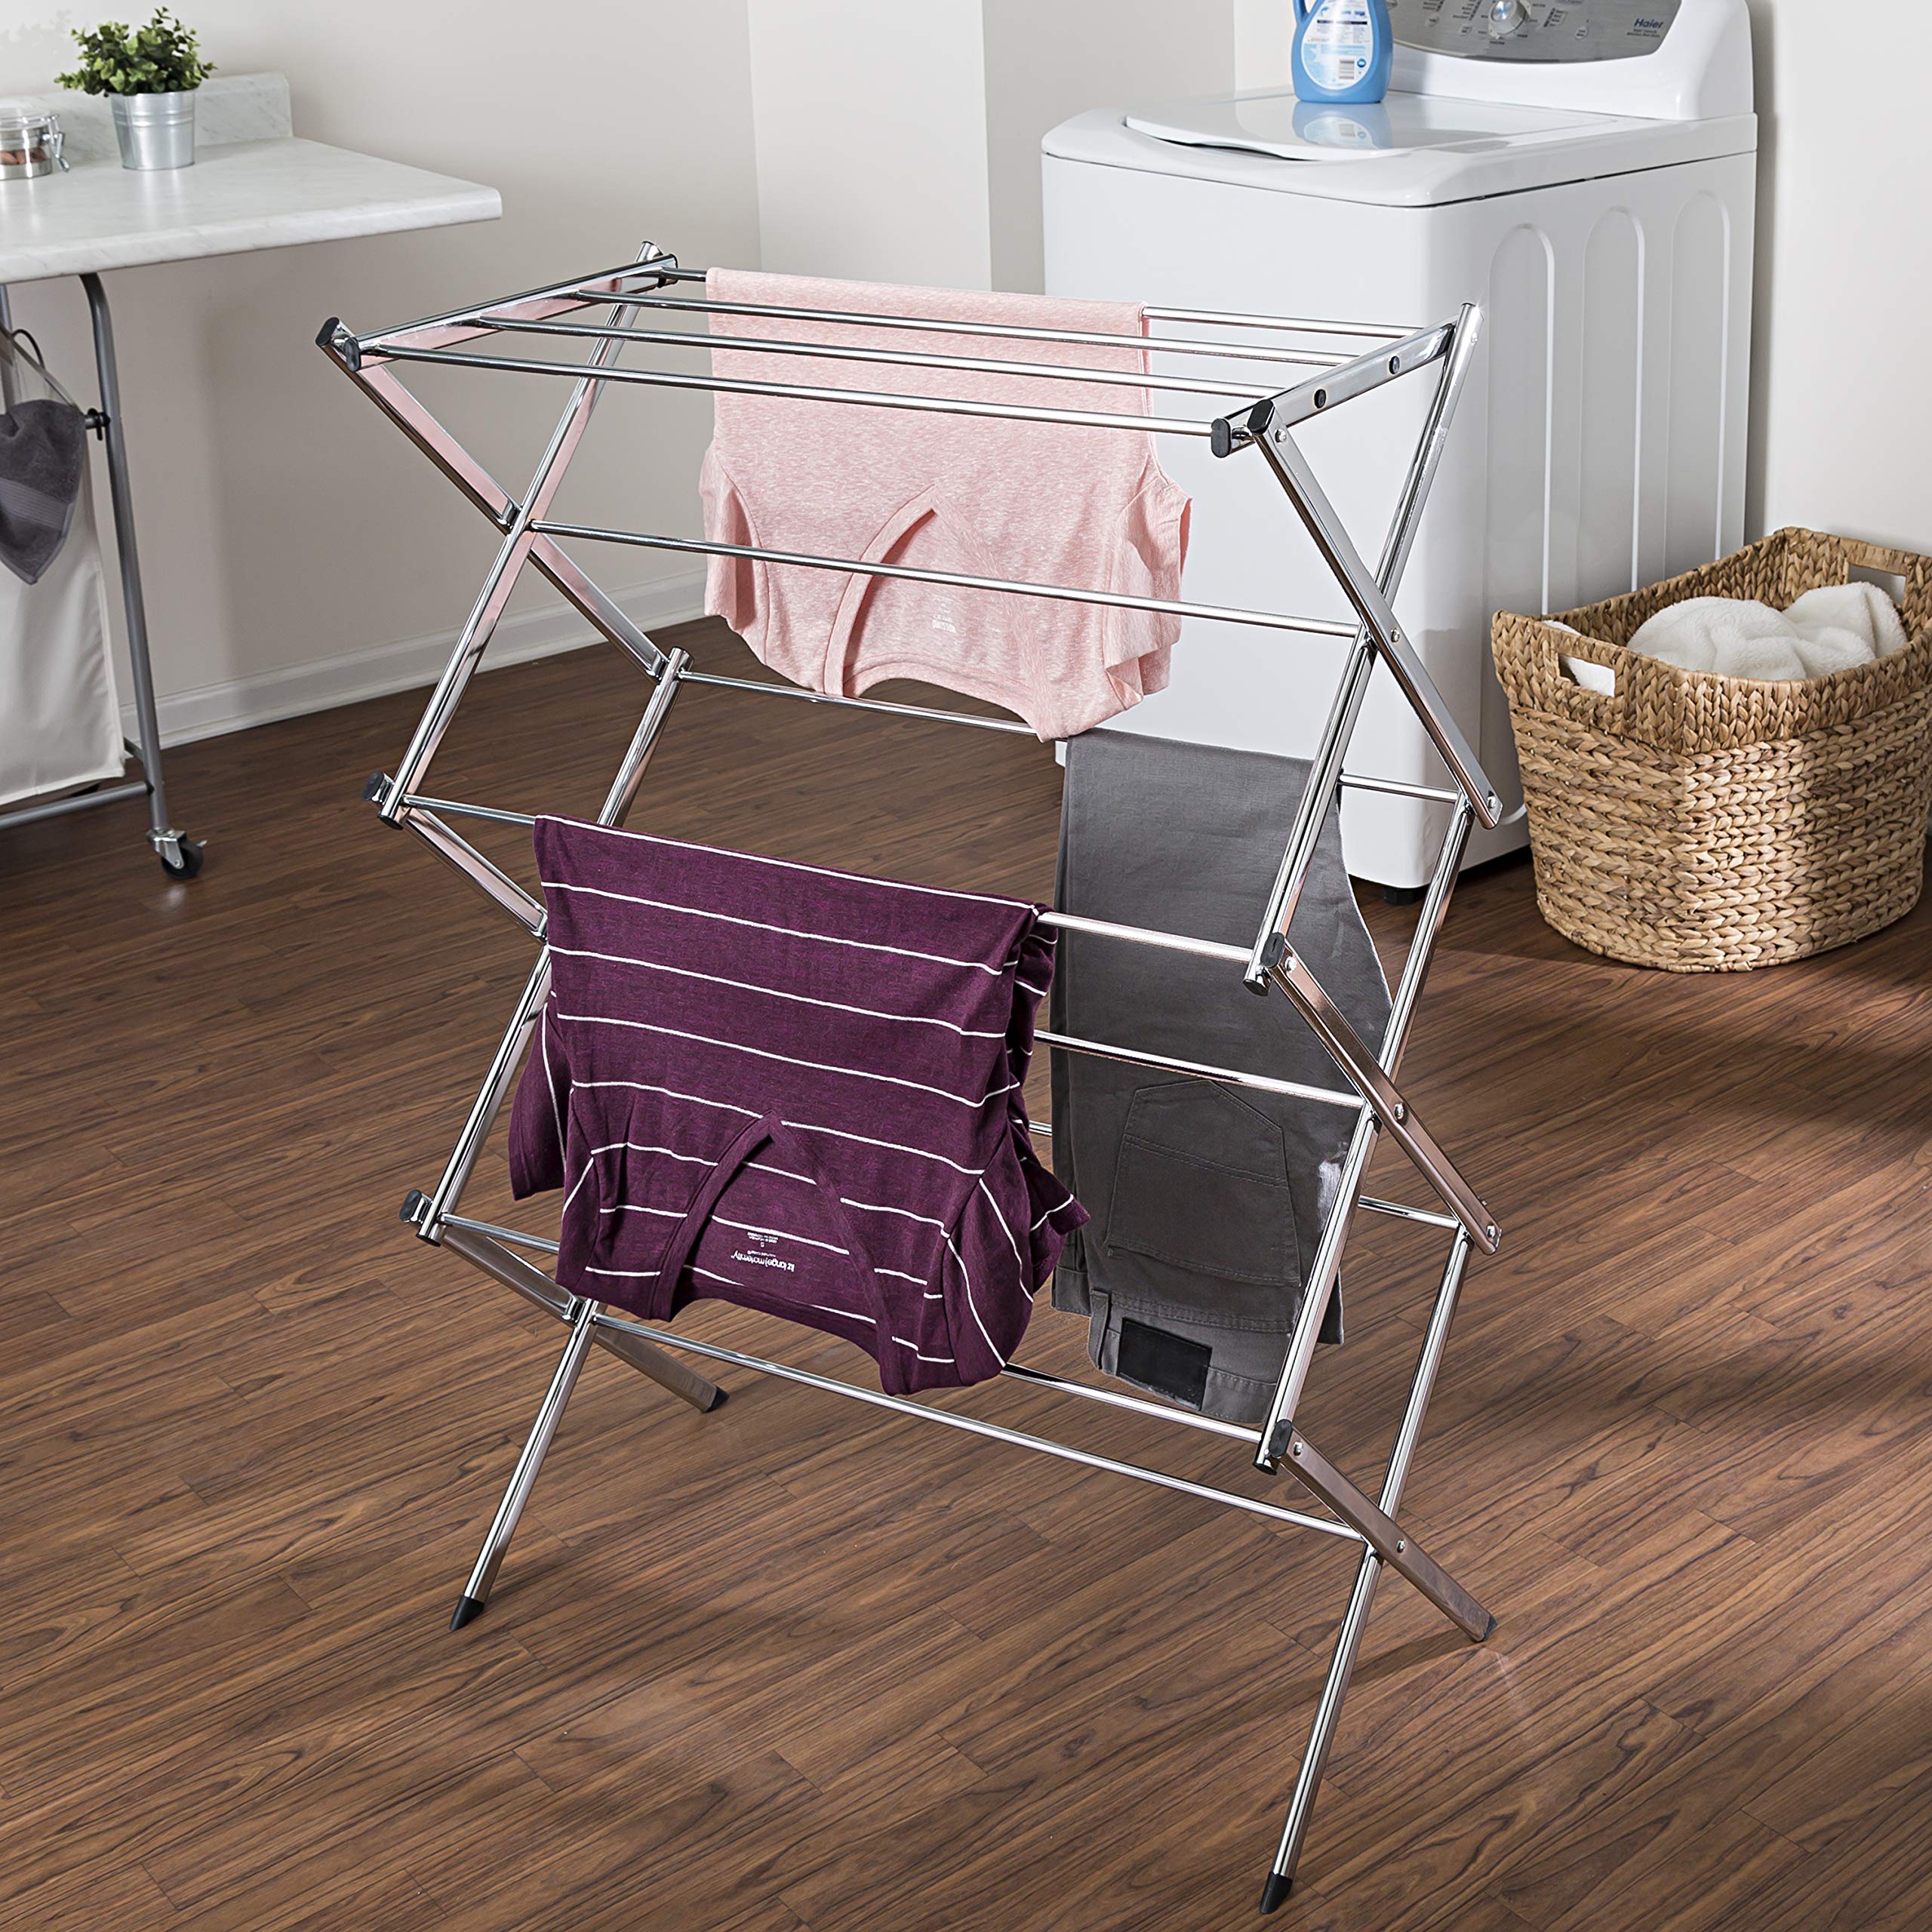 An indispensable Commercial Clothes Drying Rack Laundry Dryer in Chrome will help keep your home clean and tidy. Holds a lot of clothes, compact